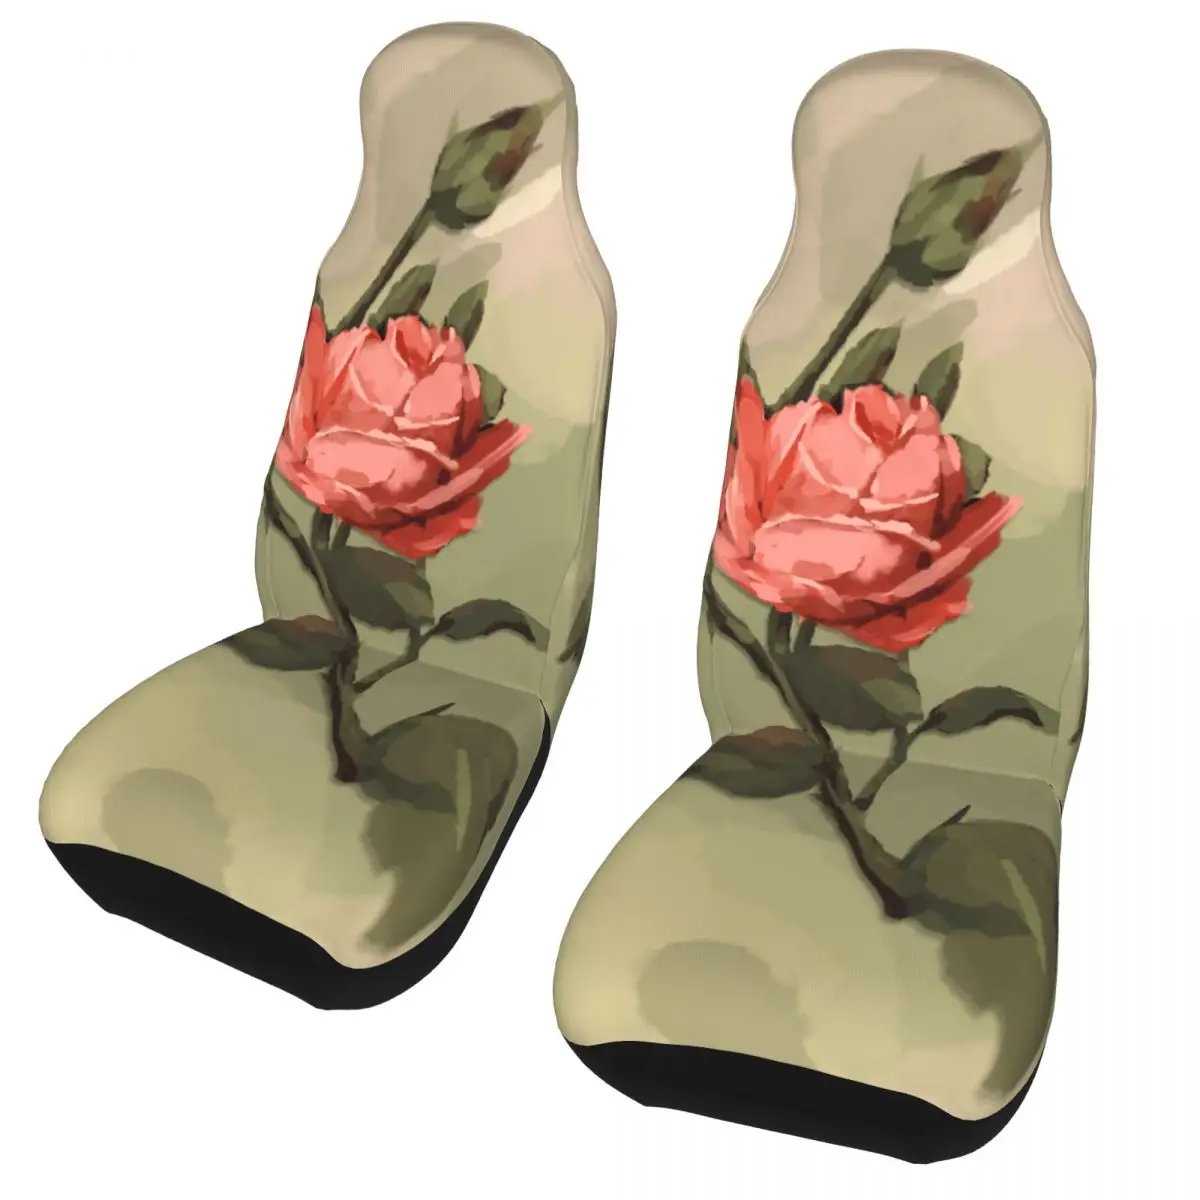 

Rose Valentine's Day Universal Car Seat Cover Four Seasons For All Kinds Models Flowers Seat Cushion/Cover Polyester Car Styling